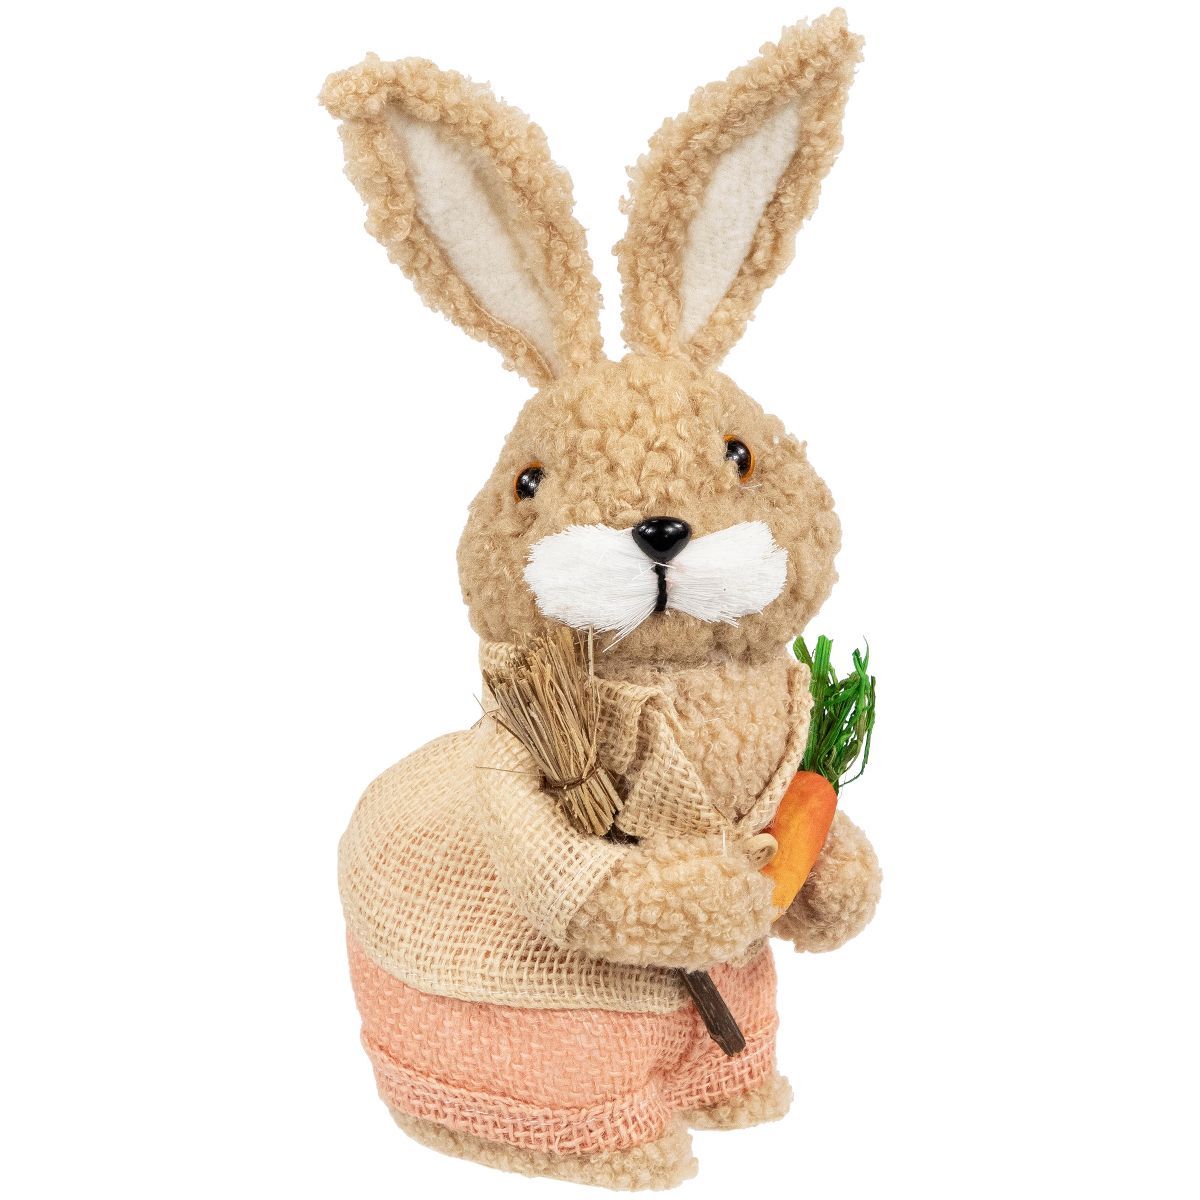 Northlight Plush Boy Easter Rabbit Figurine with Carrots - 11" | Target